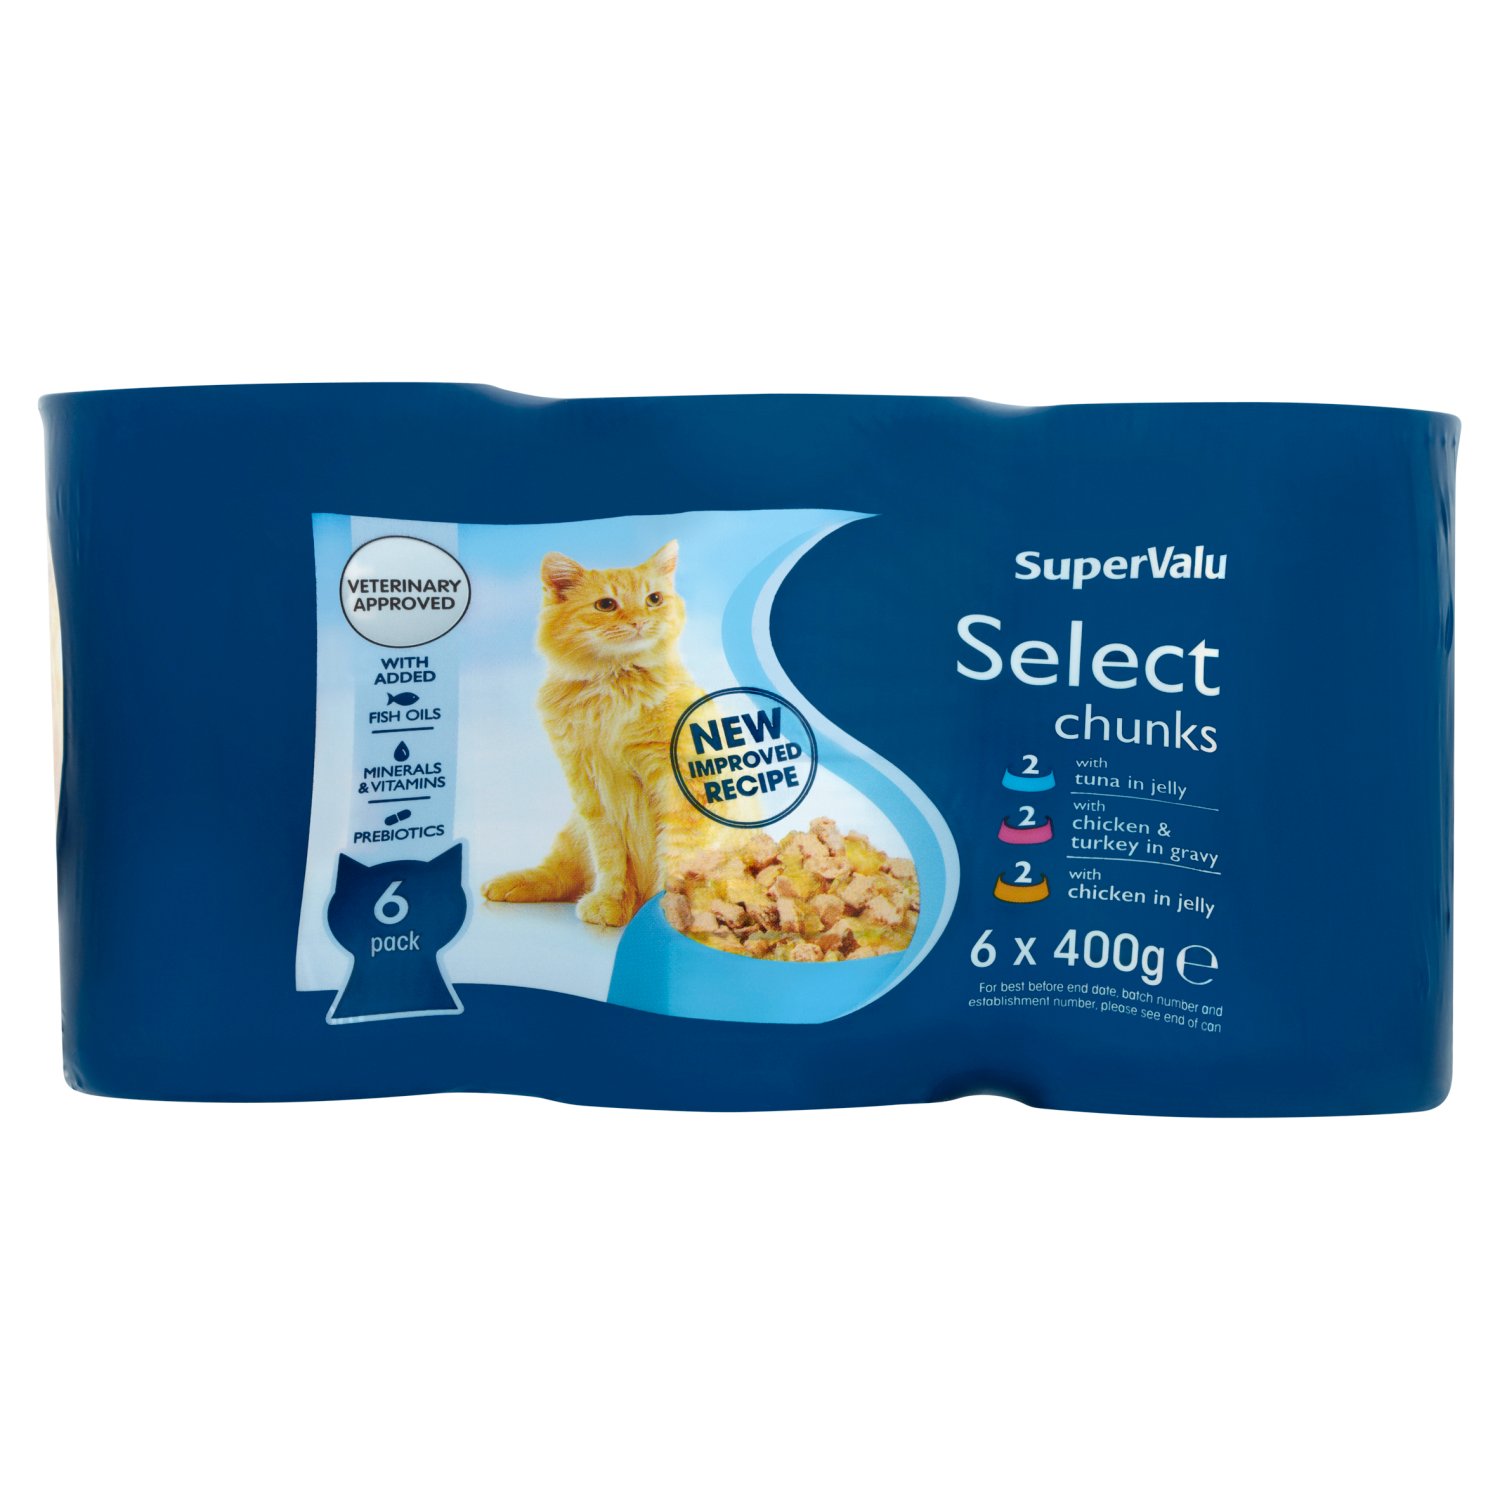 SuperValu Select Chunks Variety Cat Food Cans 6 Pack (400 g)